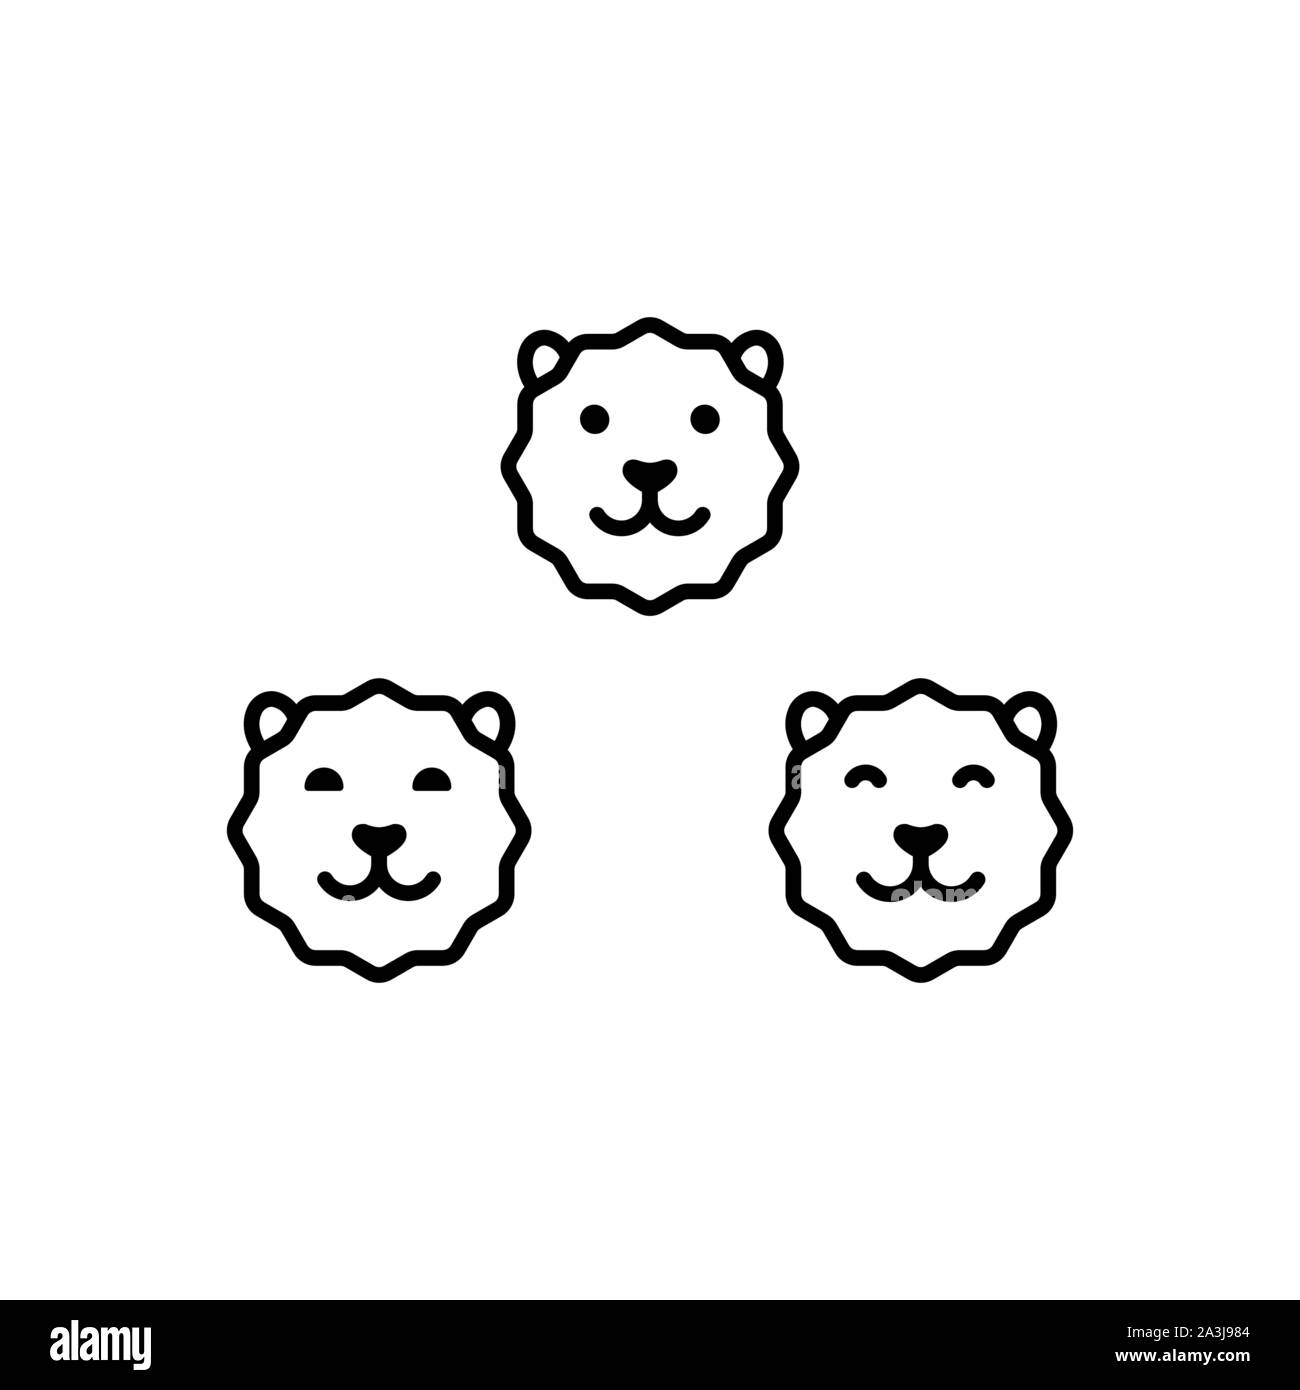 Cute faces of a lion or tiger outline icons, cute animals vector Illustration on a white background Stock Vector